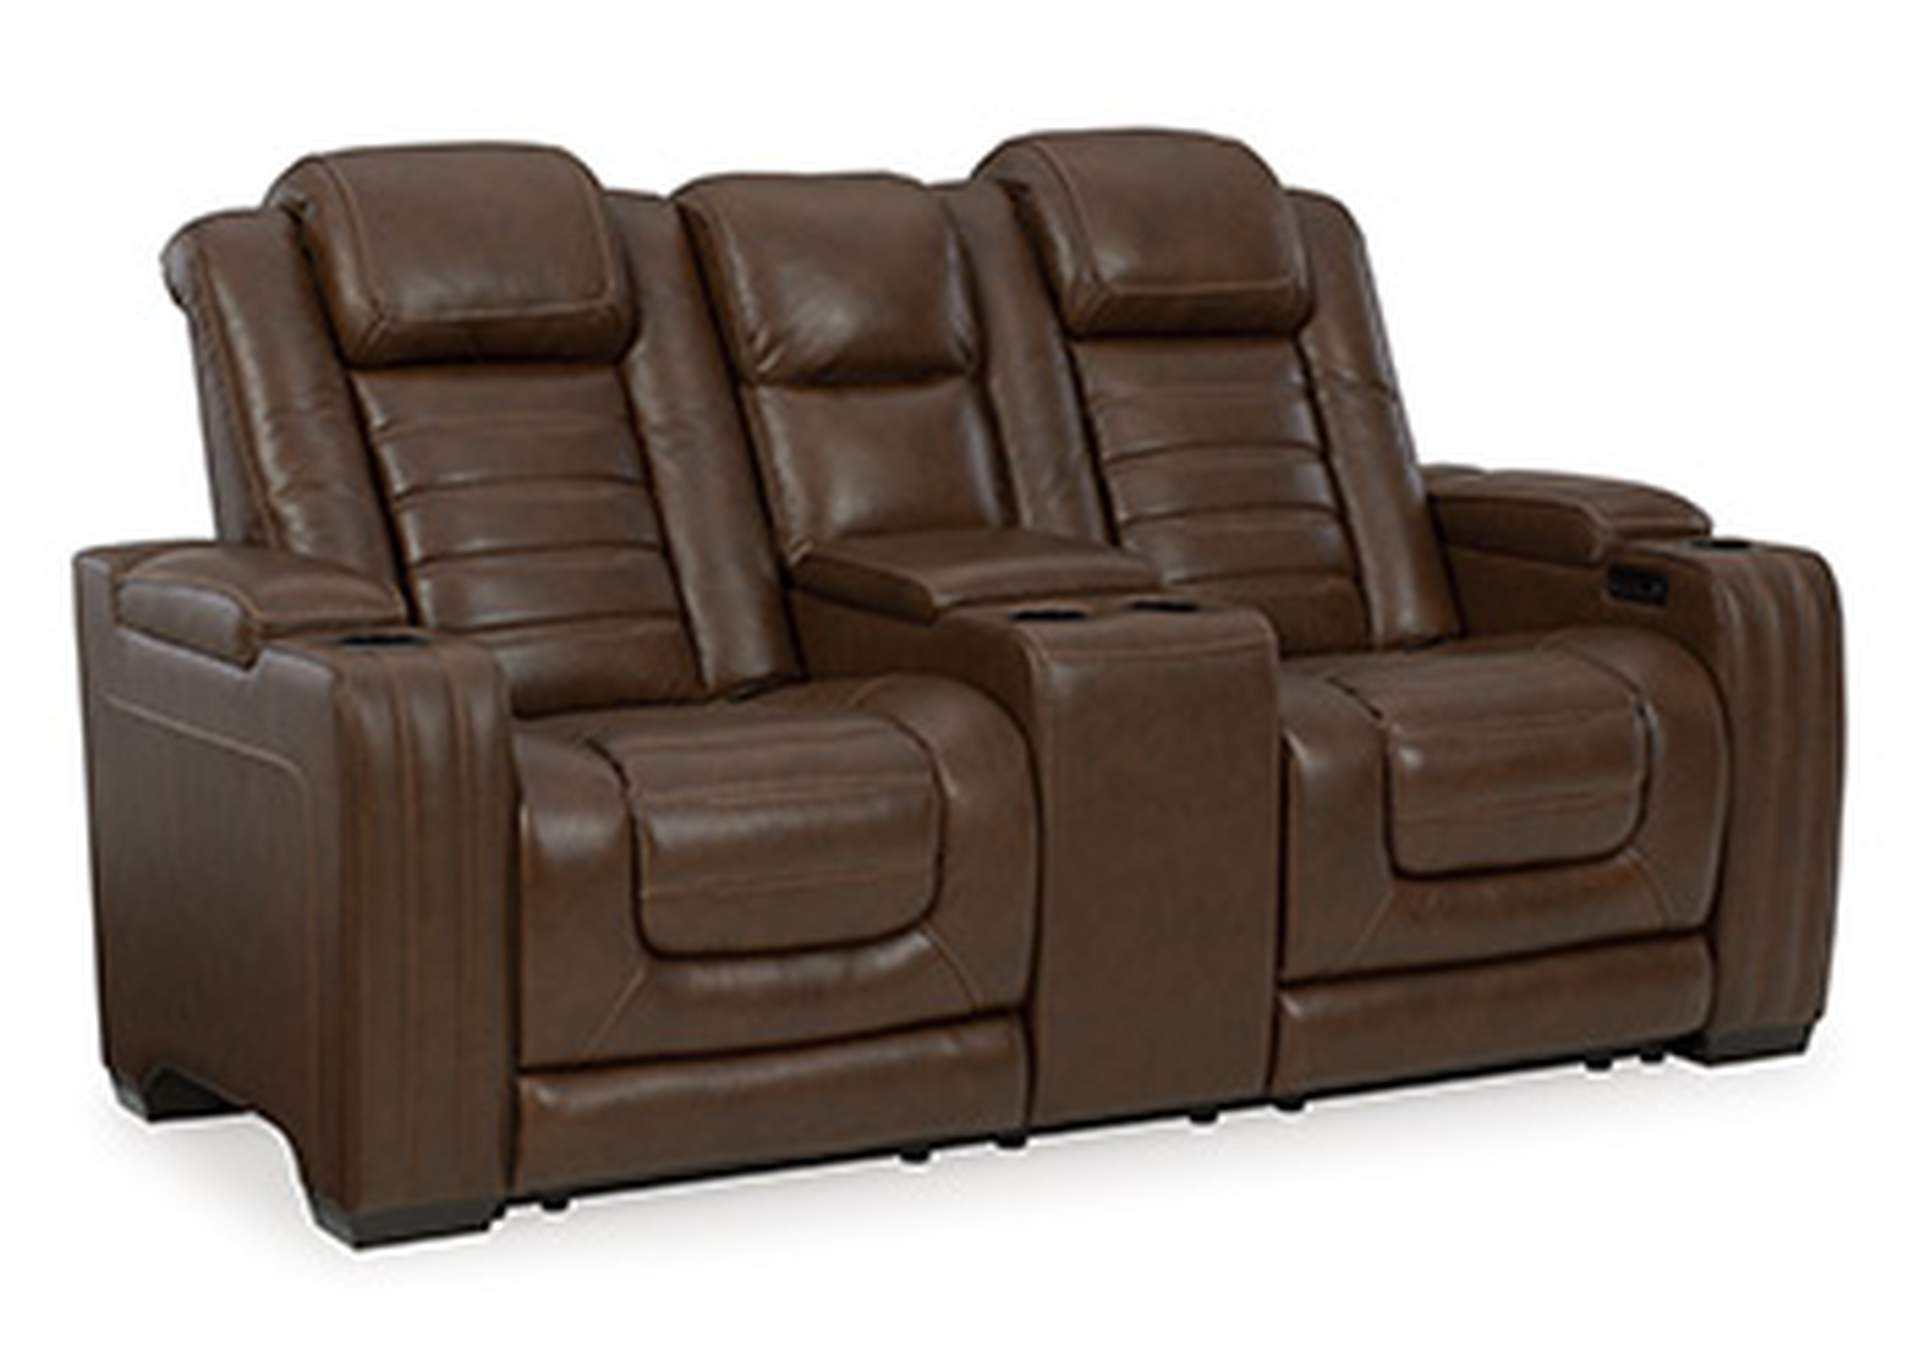 Backtrack Power Reclining Loveseat with Console,Signature Design By Ashley